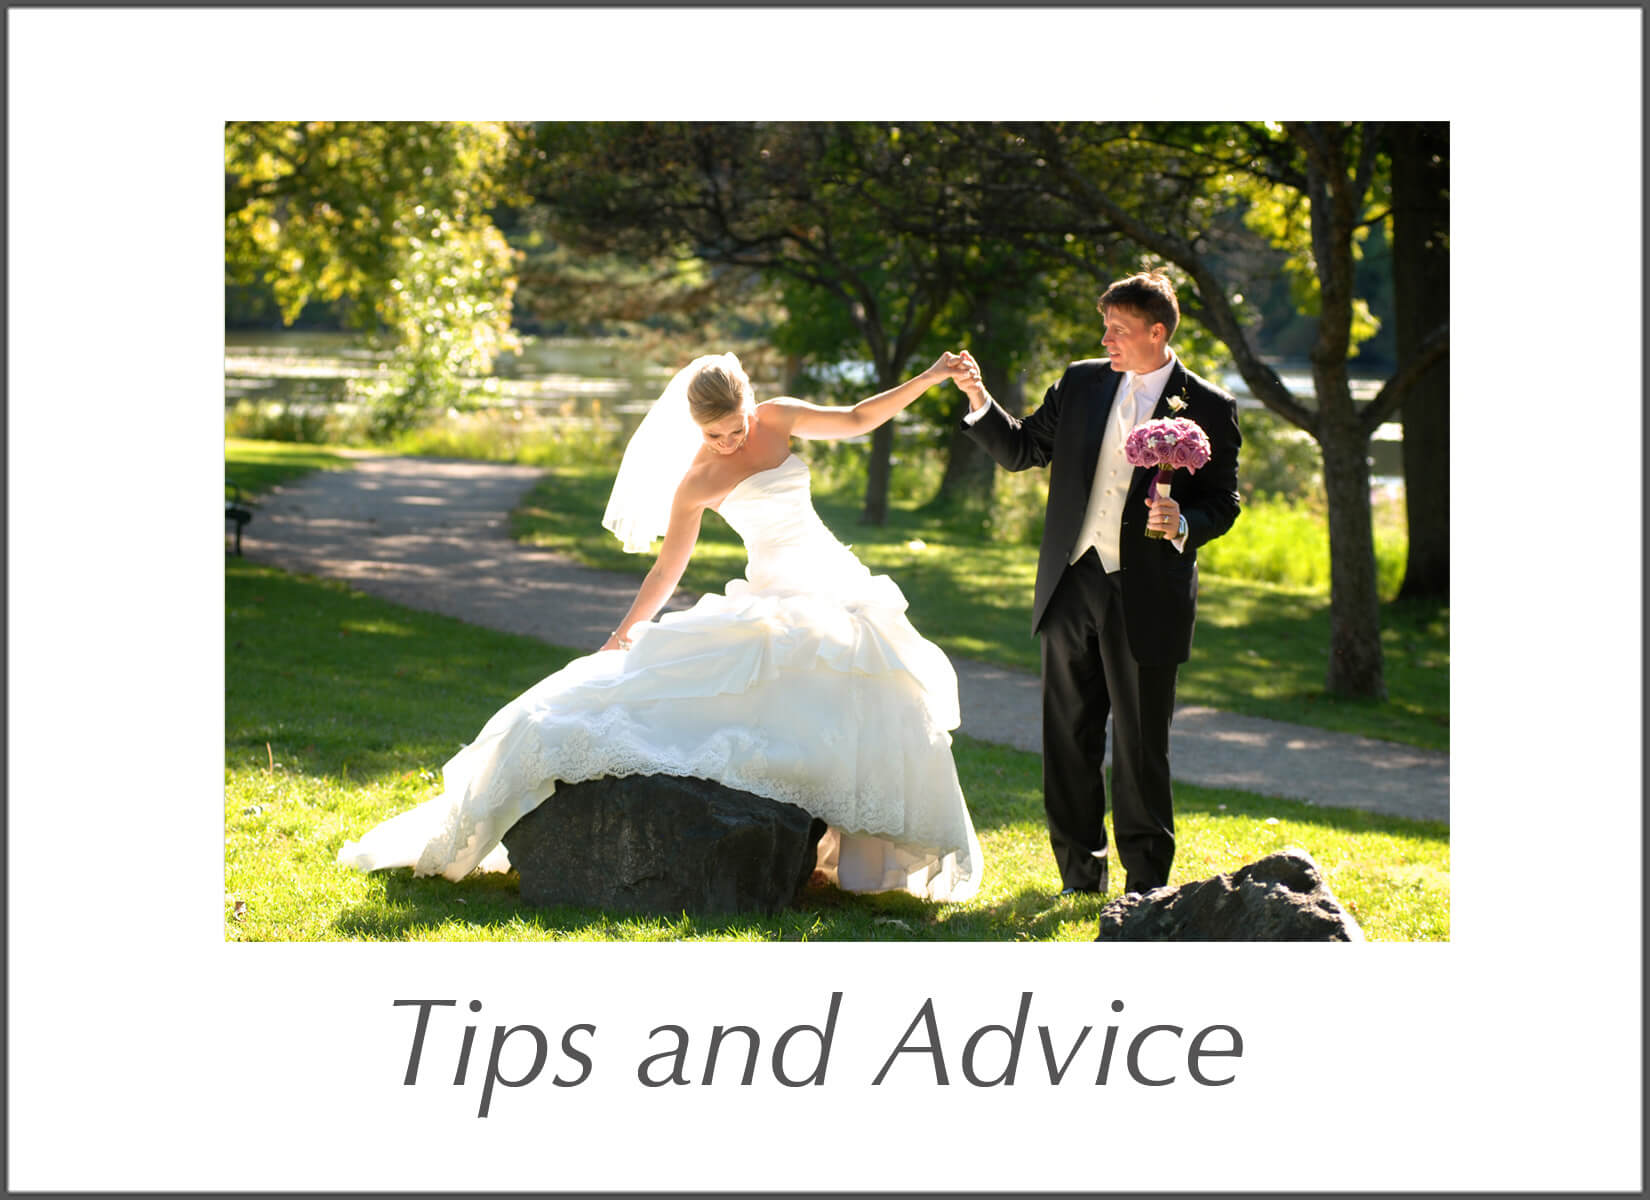 Looking for great wedding day tips so you can have a smooth wedding day?